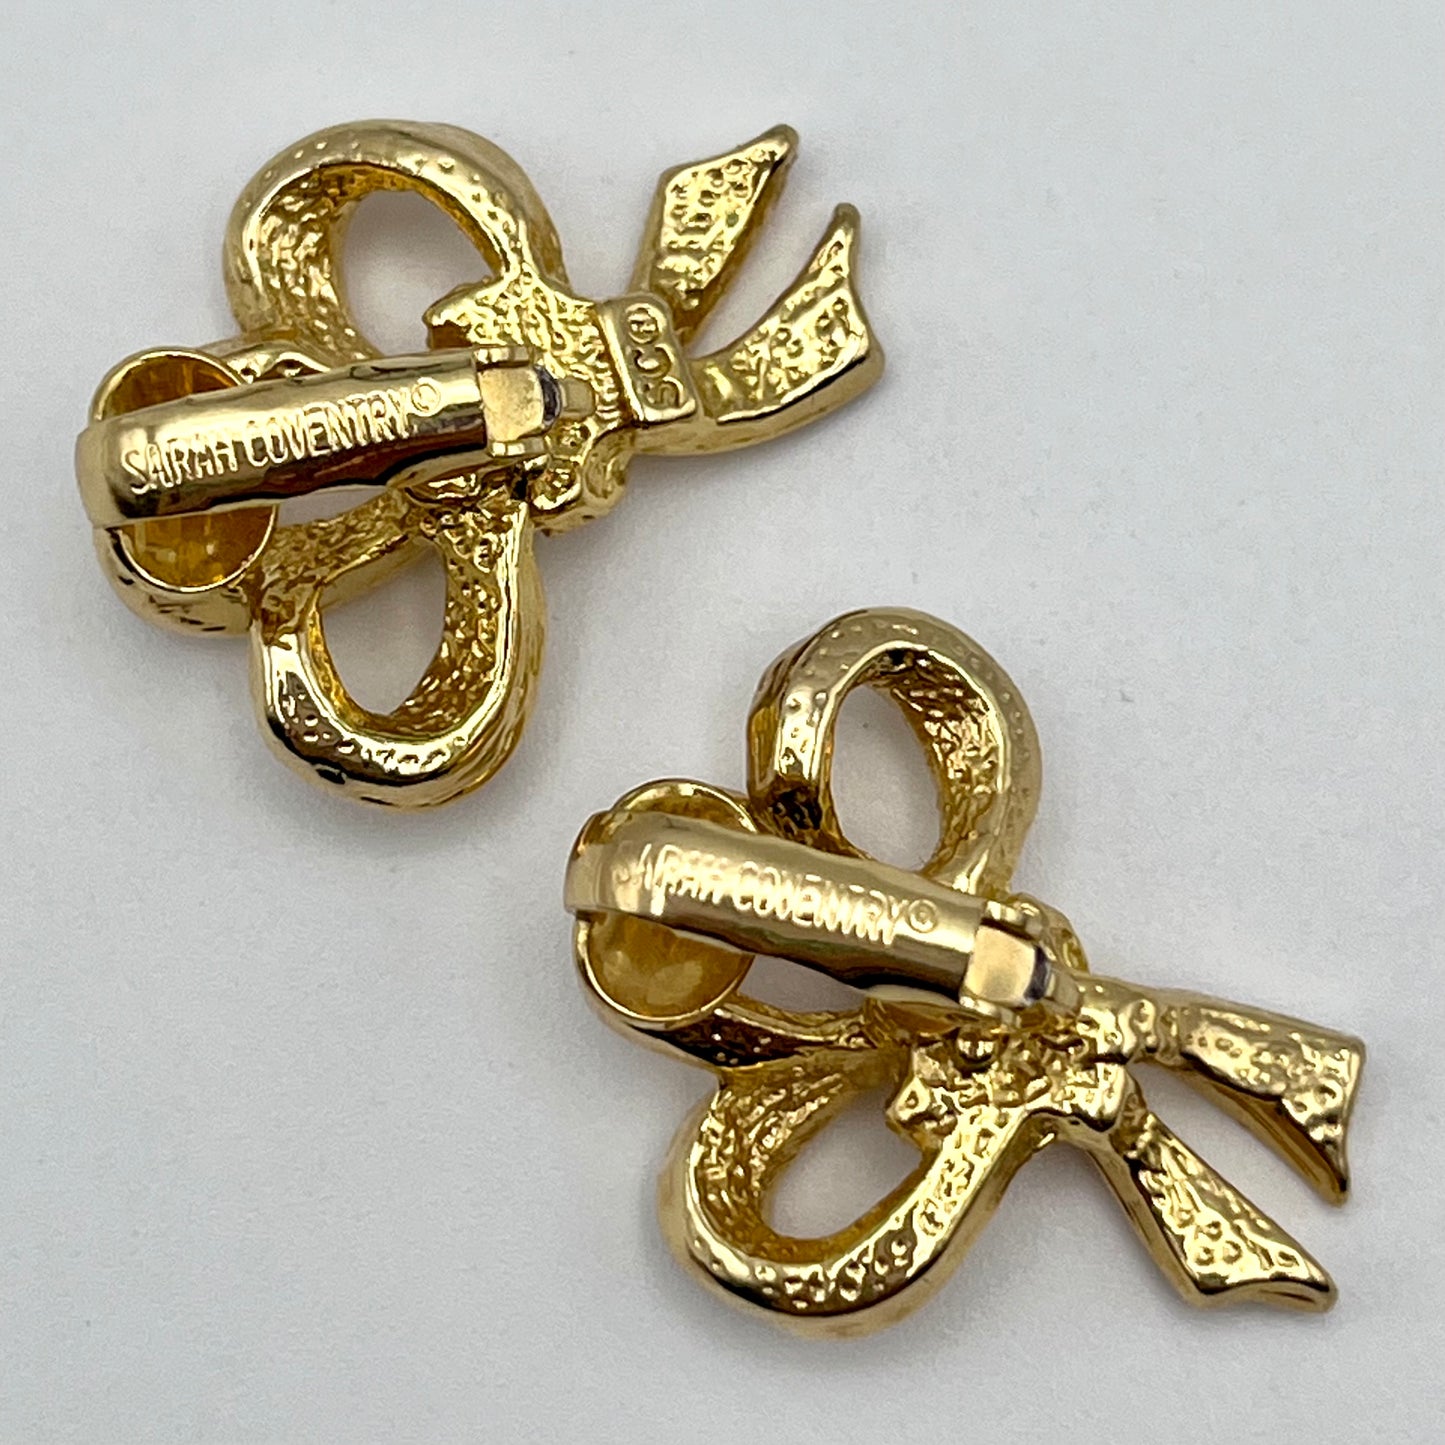 1957 Sarah Coventry Beau Catcher Earrings